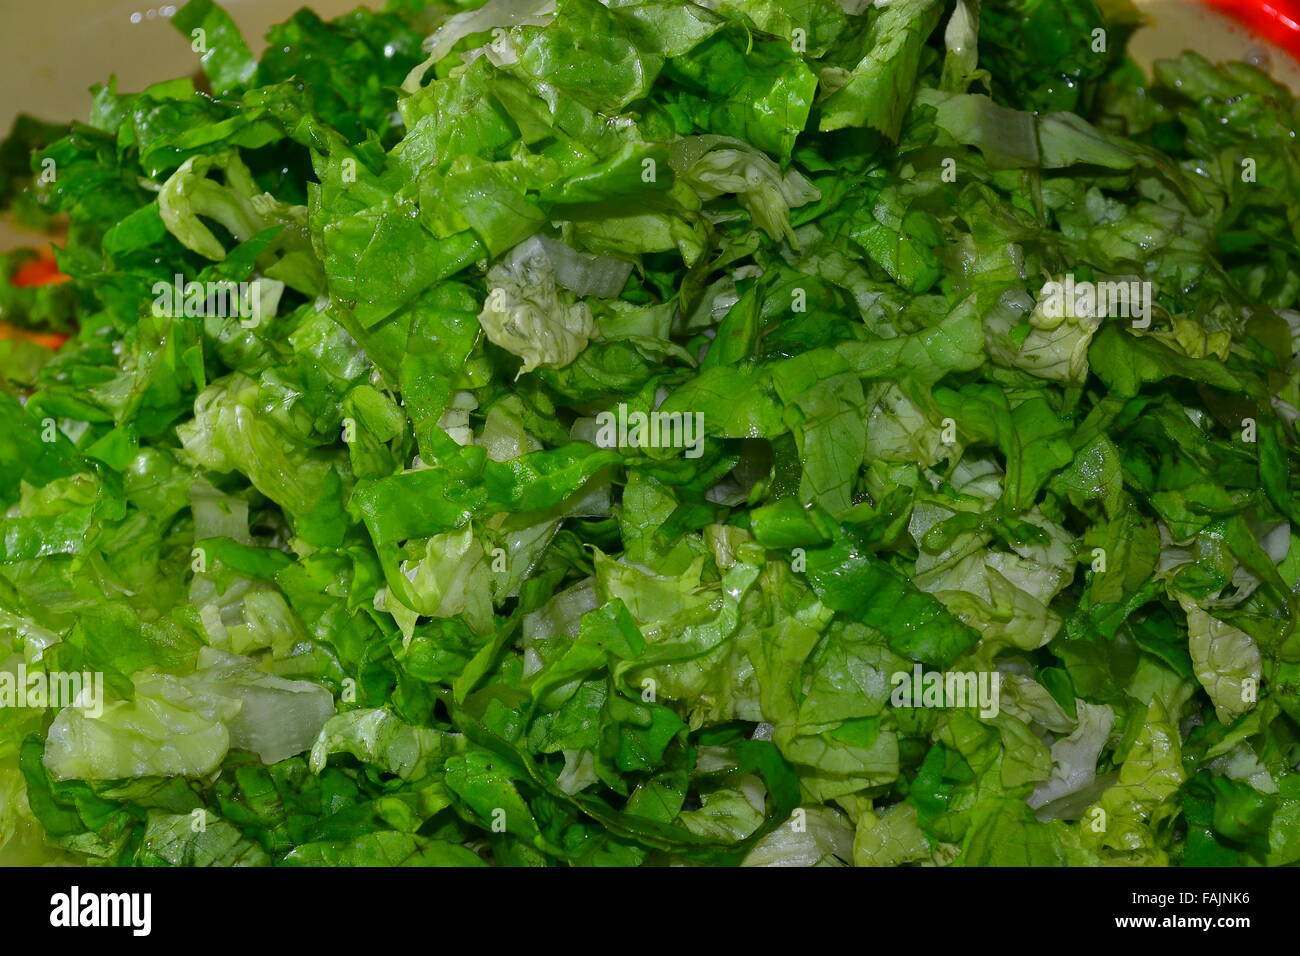 Shred lettuce presented on a tray Stock Photo